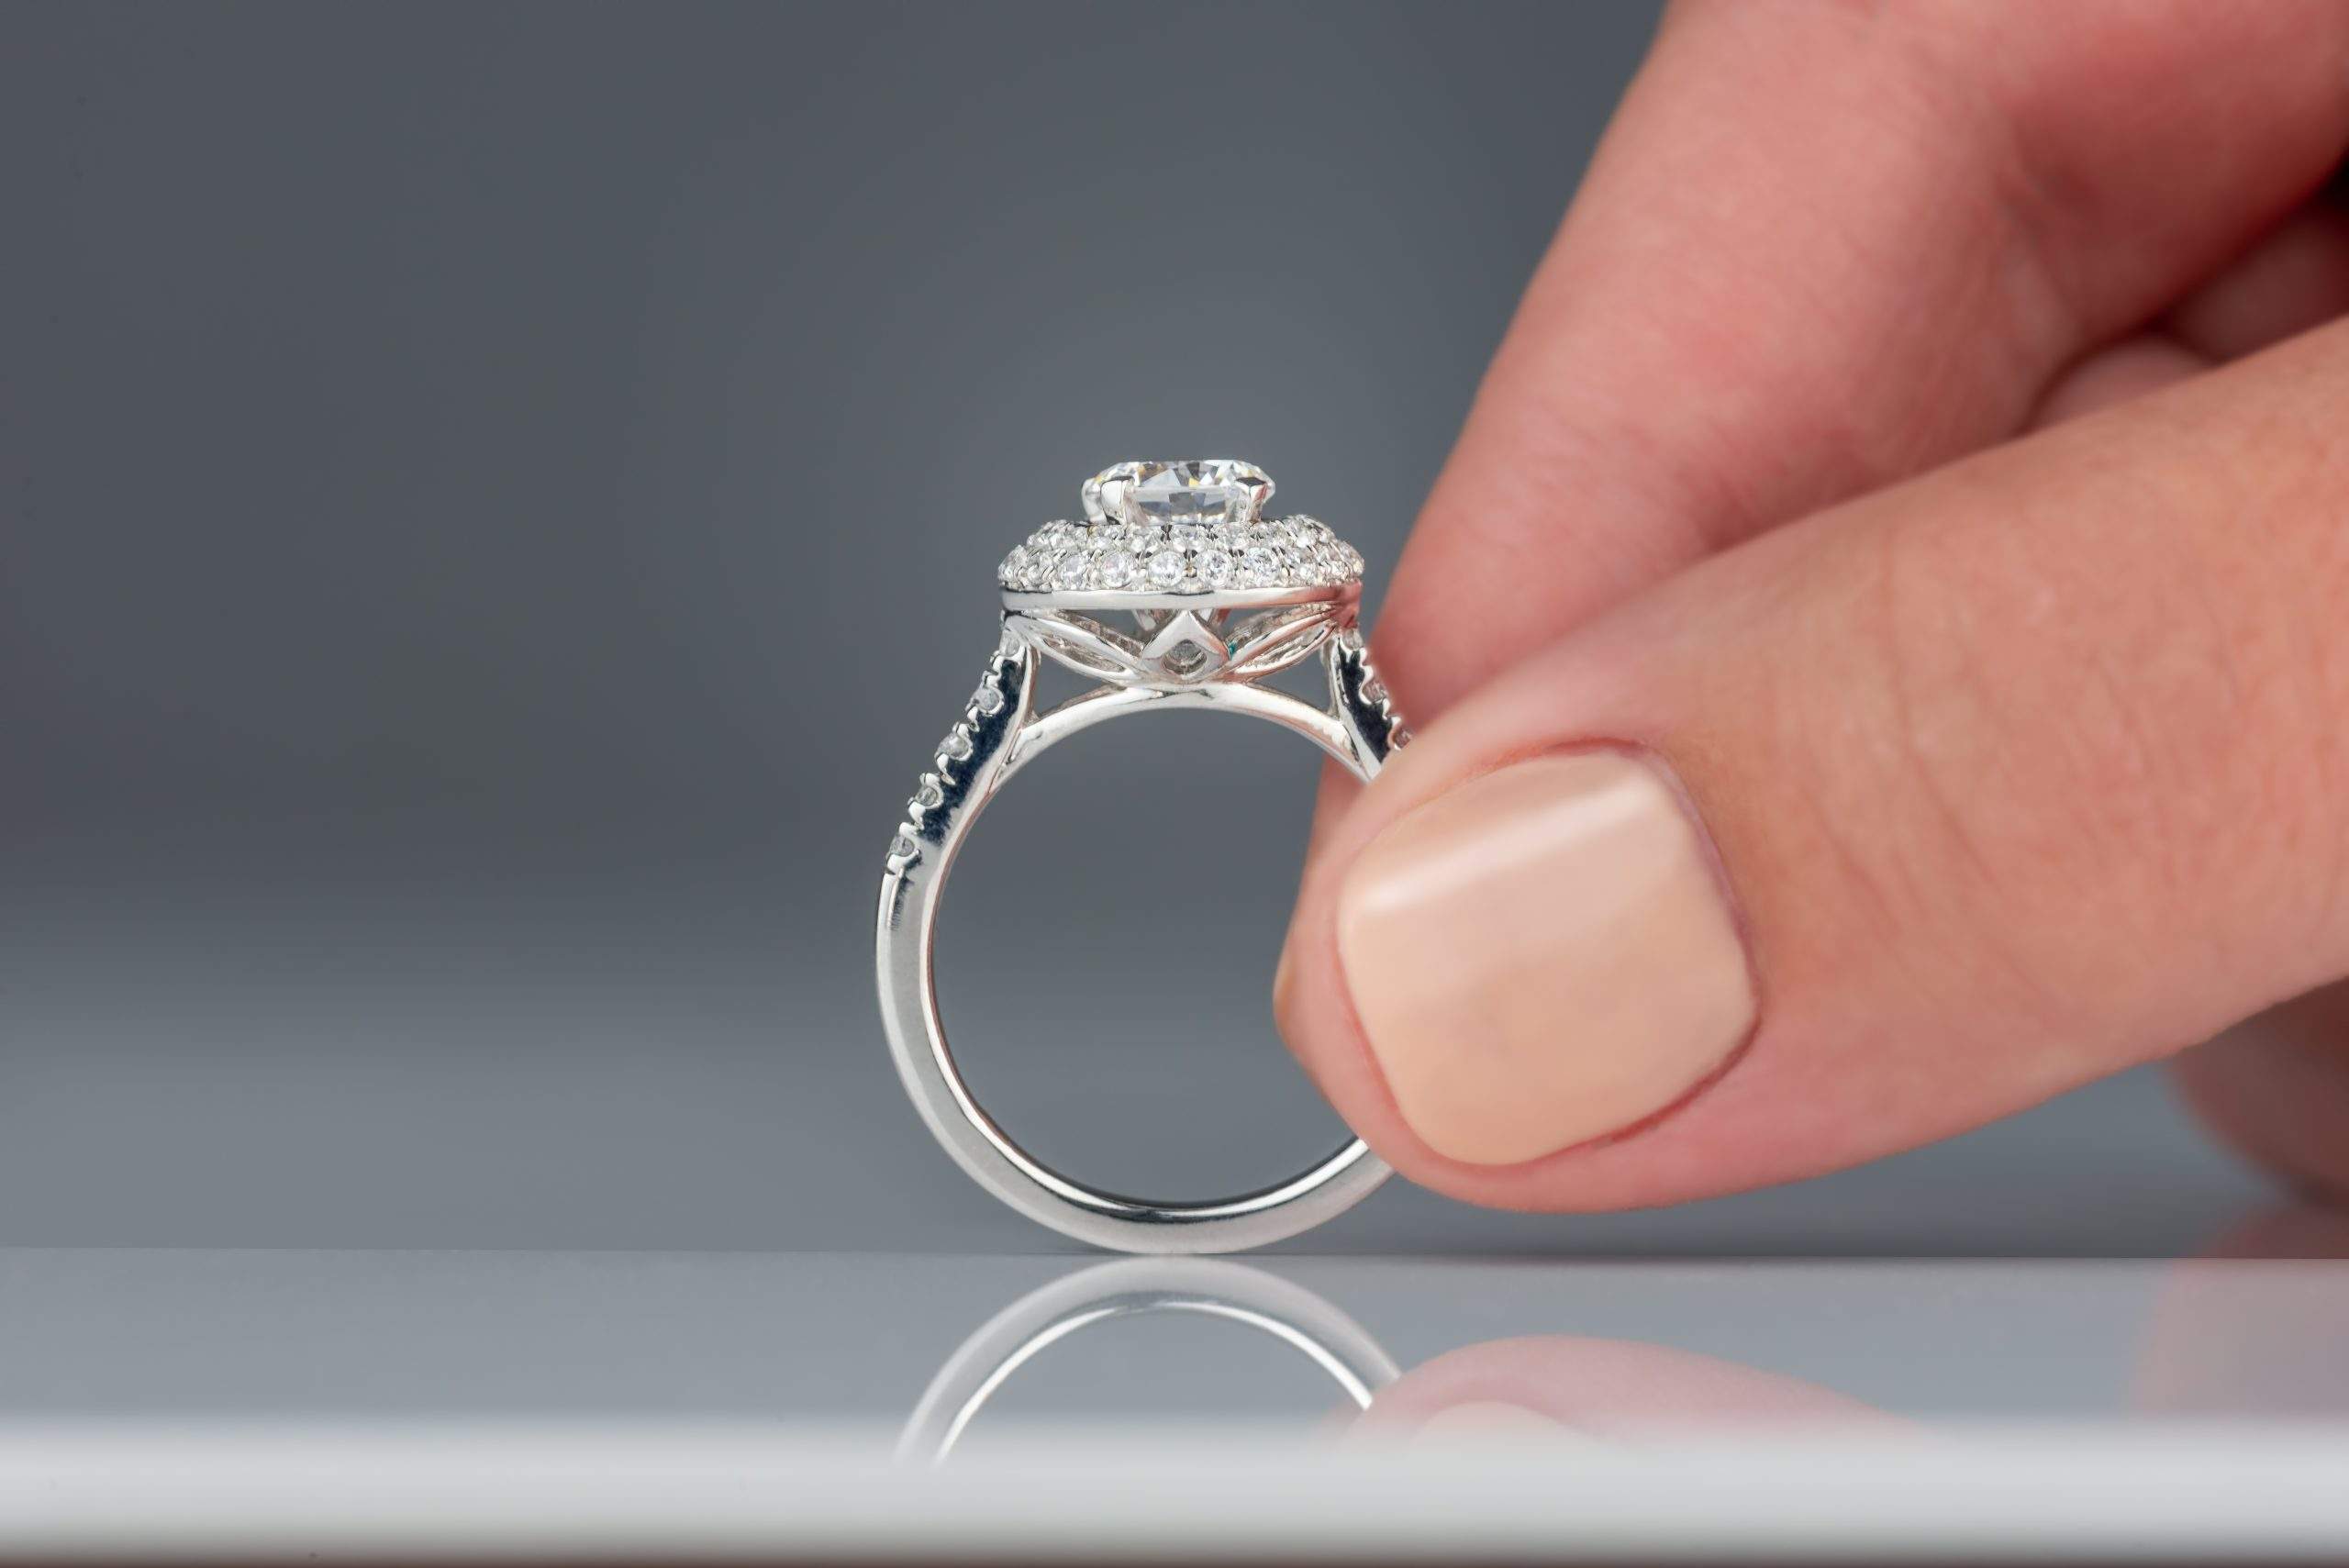 What are Some Basic Tips to consider When Shopping for a Diamond Engagement Ring?